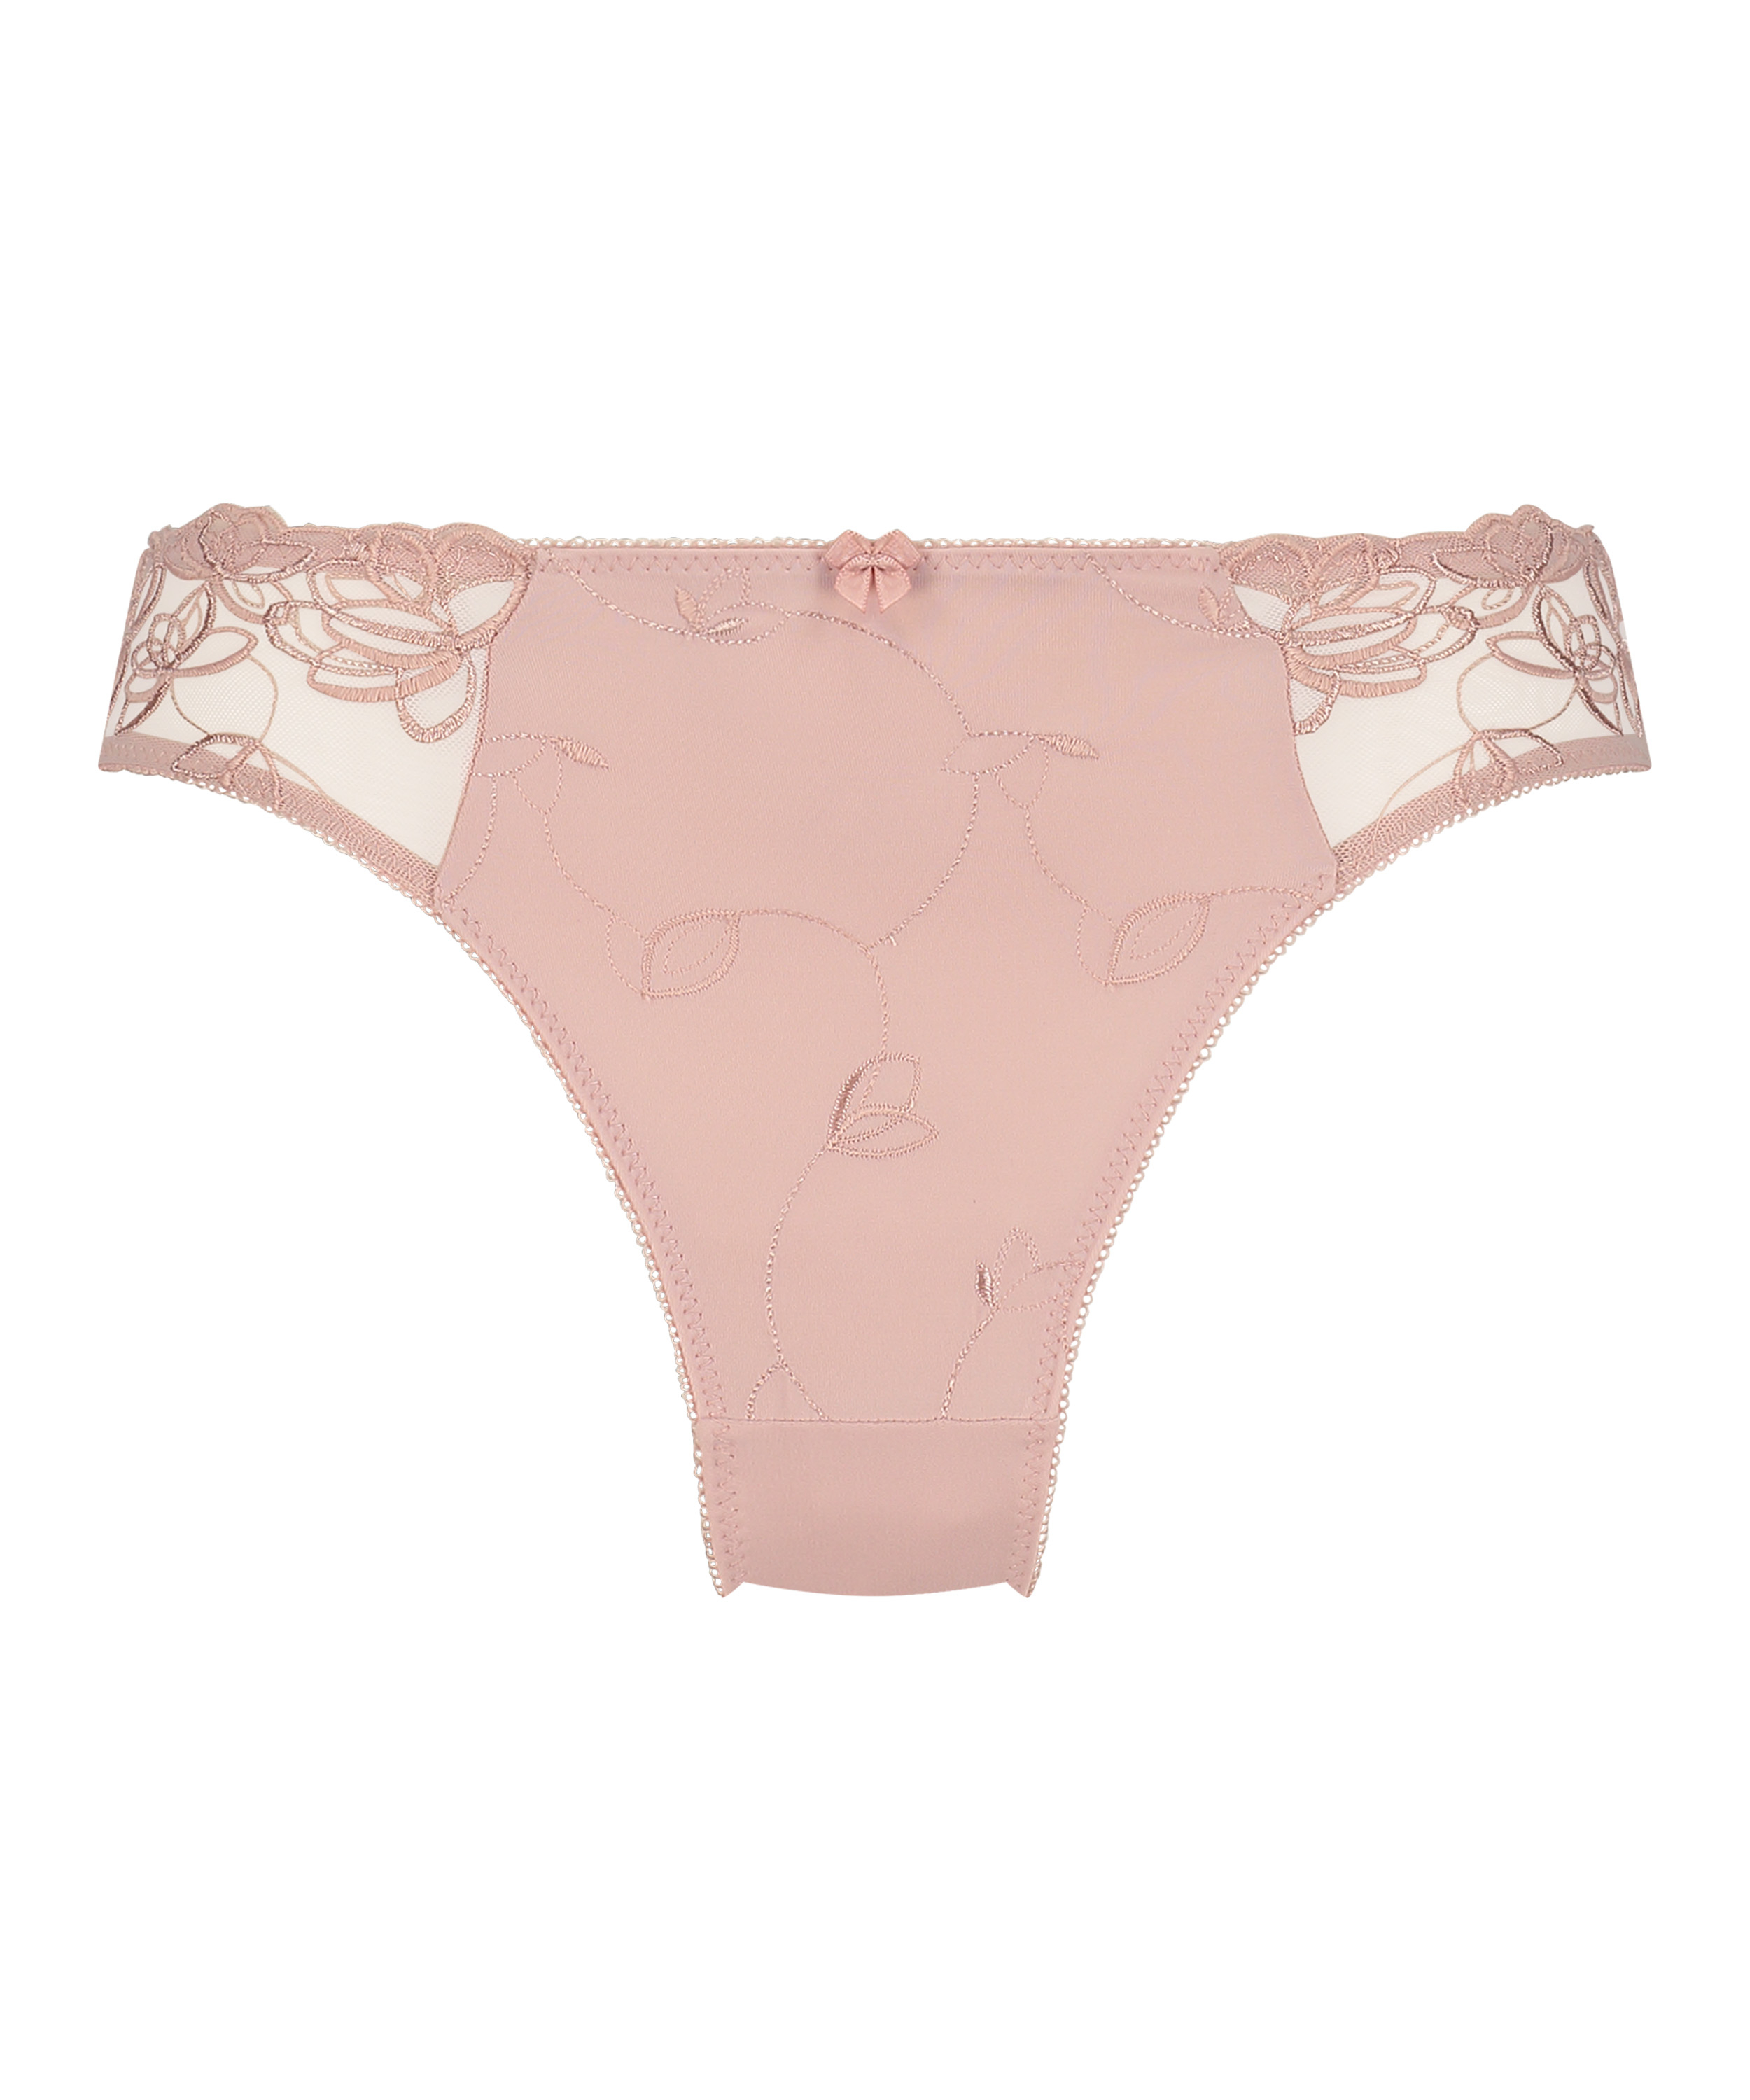 Diva knickers, Pink, main